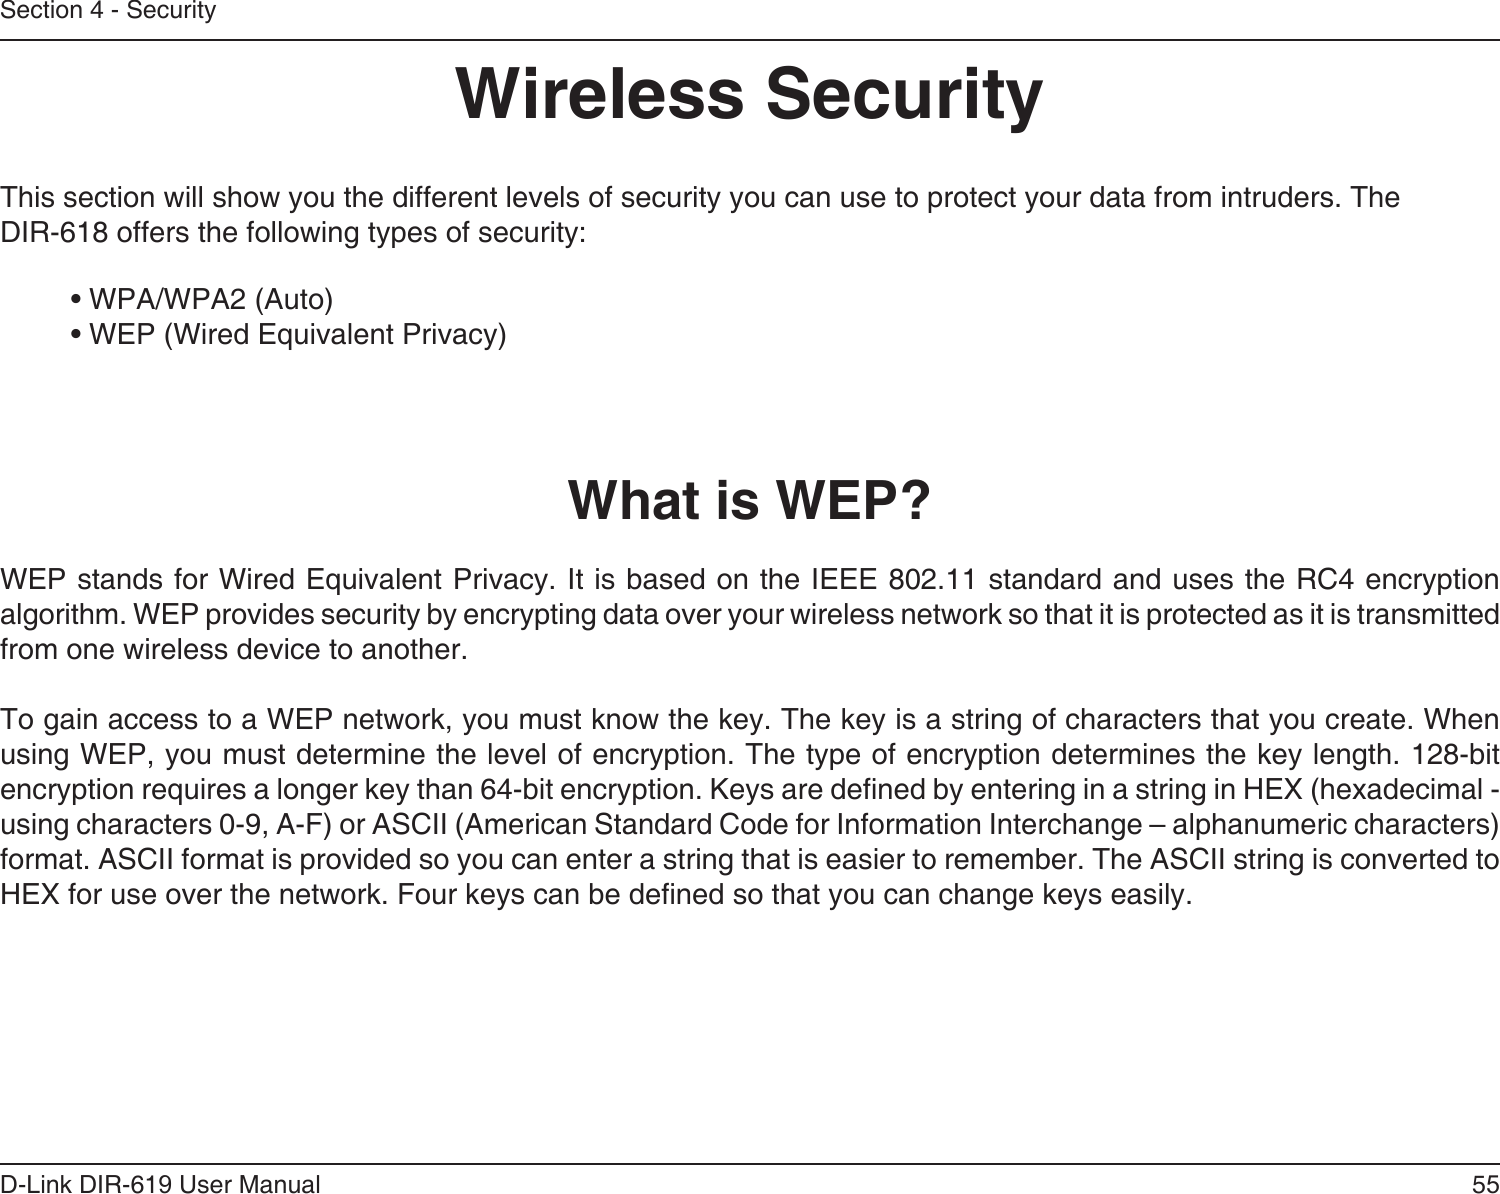 55D-Link DIR-619 User ManualSection 4 - SecurityWireless SecurityThis section will show you the different levels of security you can use to protect your data from intruders. TheDIR-618 offers the following types of security:• WPA/WPA2 (Auto)   • WEP (Wired Equivalent Privacy)What is WEP?WEP stands for Wired Equivalent Privacy. It is based on the IEEE 802.11 standard and uses the RC4 encryptionalgorithm. WEP provides security by encrypting data over your wireless network so that it is protected as it is transmittedfrom one wireless device to another.To gain access to a WEP network, you must know the key. The key is a string of characters that you create. When using WEP, you must determine the level of encryption. The type of encryption determines the key length. 128-bit encryption requires a longer key than 64-bit encryption. Keys are dened by entering in a string in HEX (hexadecimal - using characters 0-9, A-F) or ASCII (American Standard Code for Information Interchange – alphanumeric characters) format. ASCII format is provided so you can enter a string that is easier to remember. The ASCII string is converted toHEX for use over the network. Four keys can be dened so that you can change keys easily.